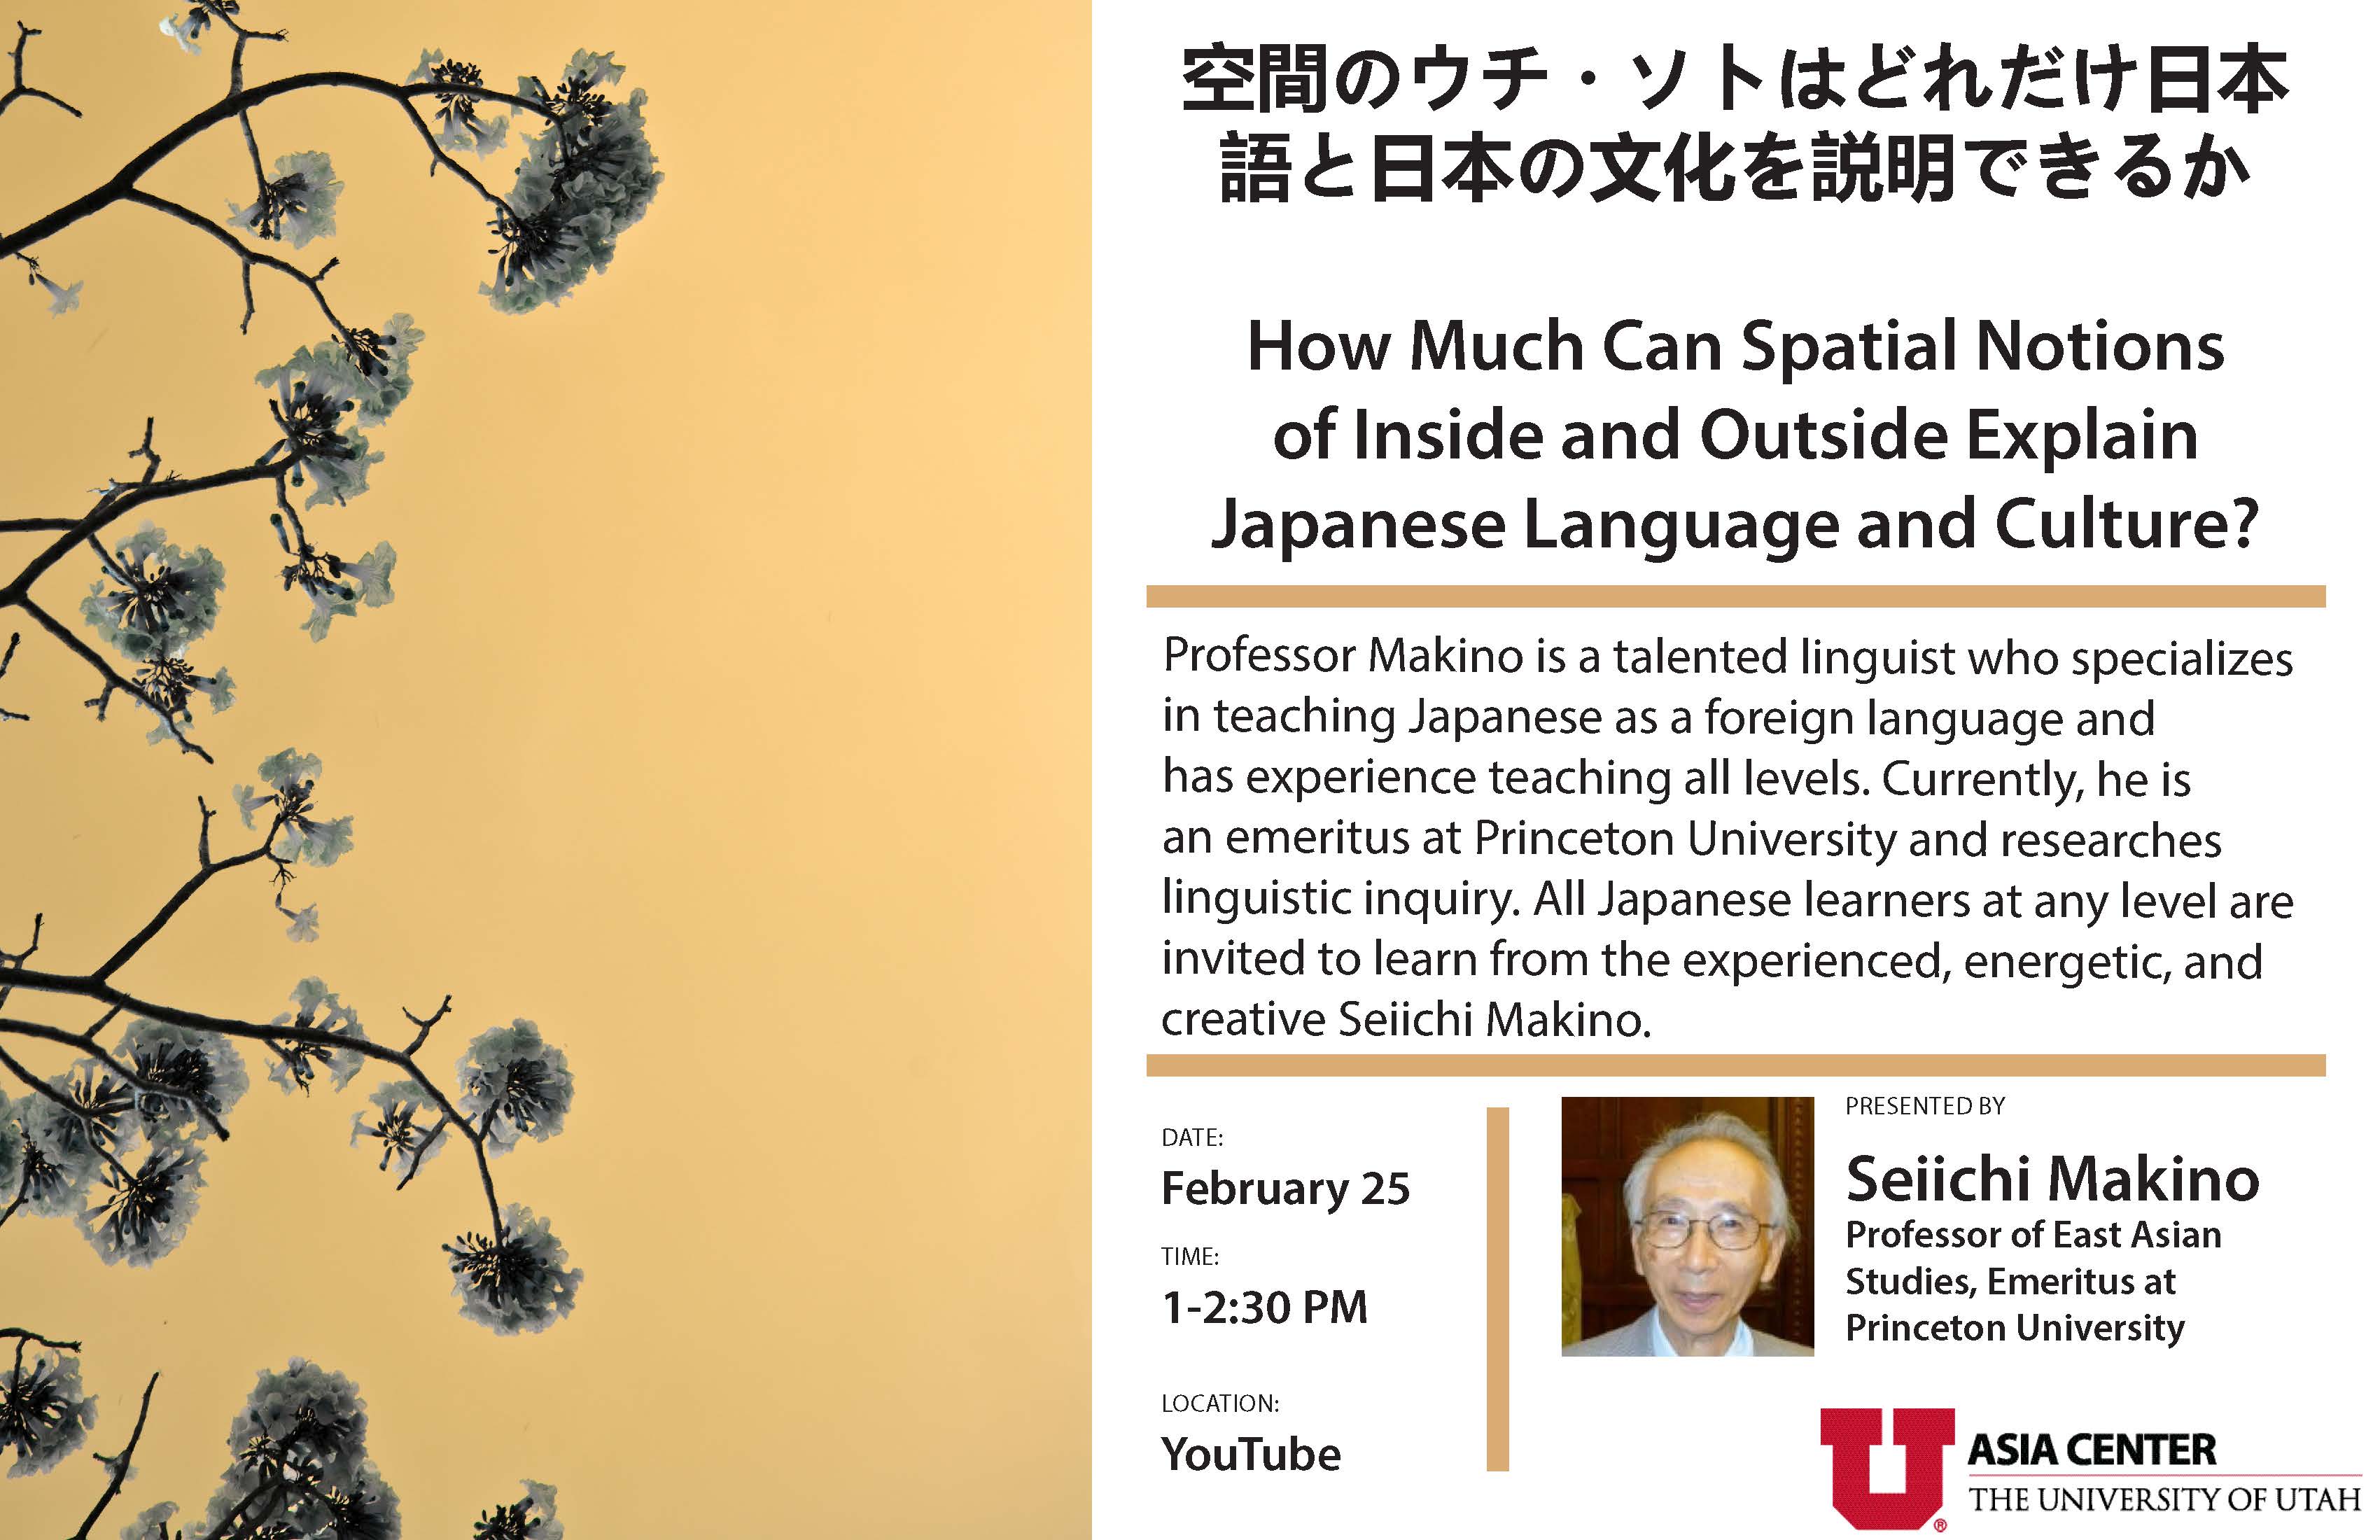 How Much Can Spatial Notions of Inside and Outside Explain Japanese Language and Culture